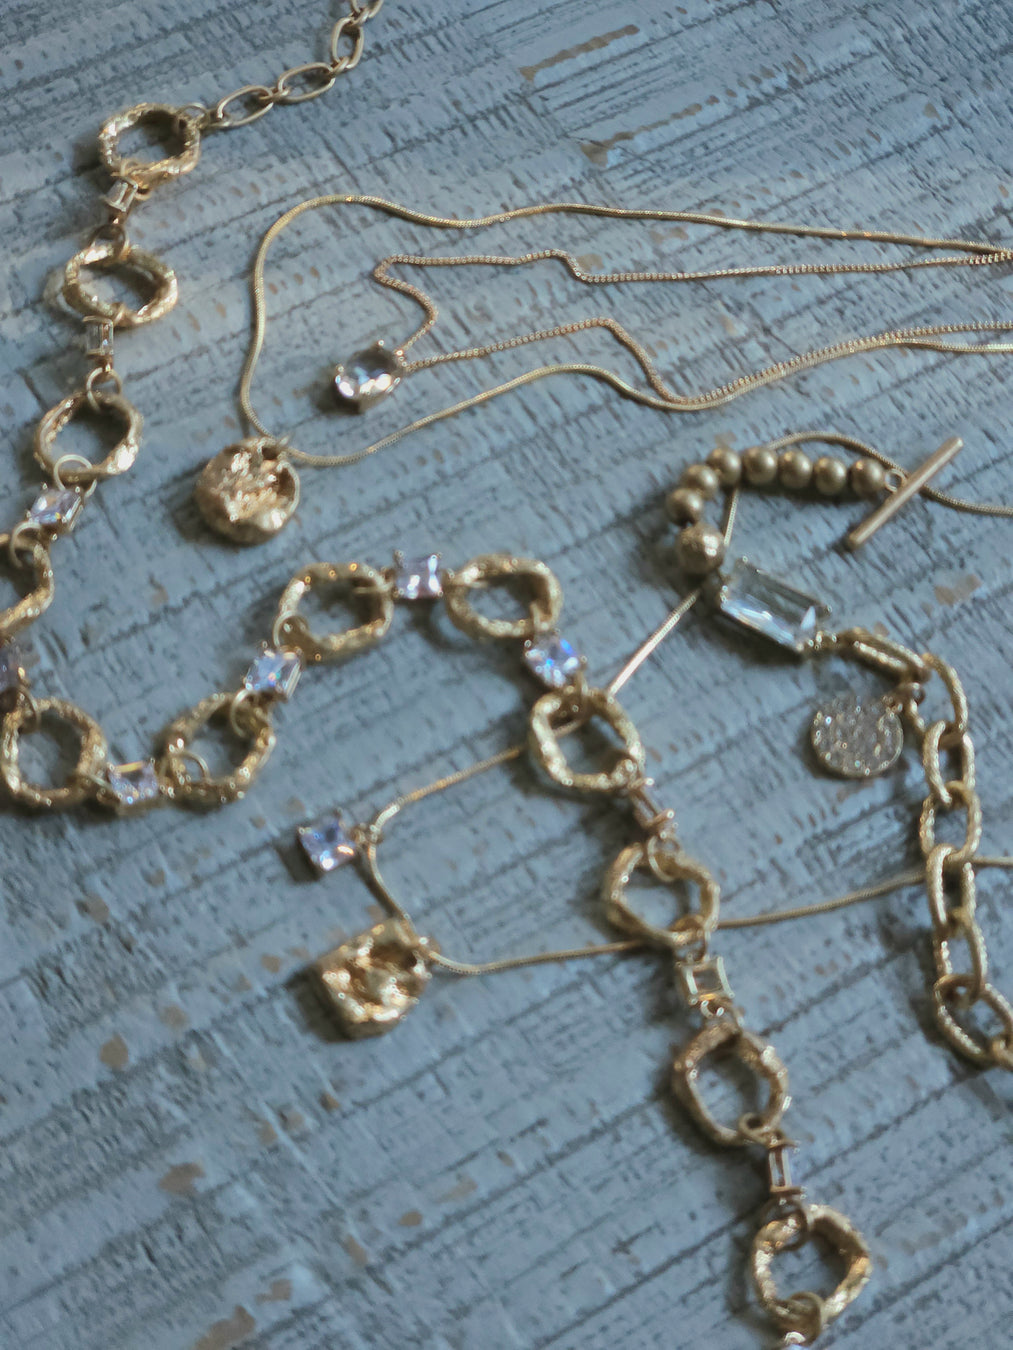 Fashion Jewelry Made of Textured Metals and Crystals